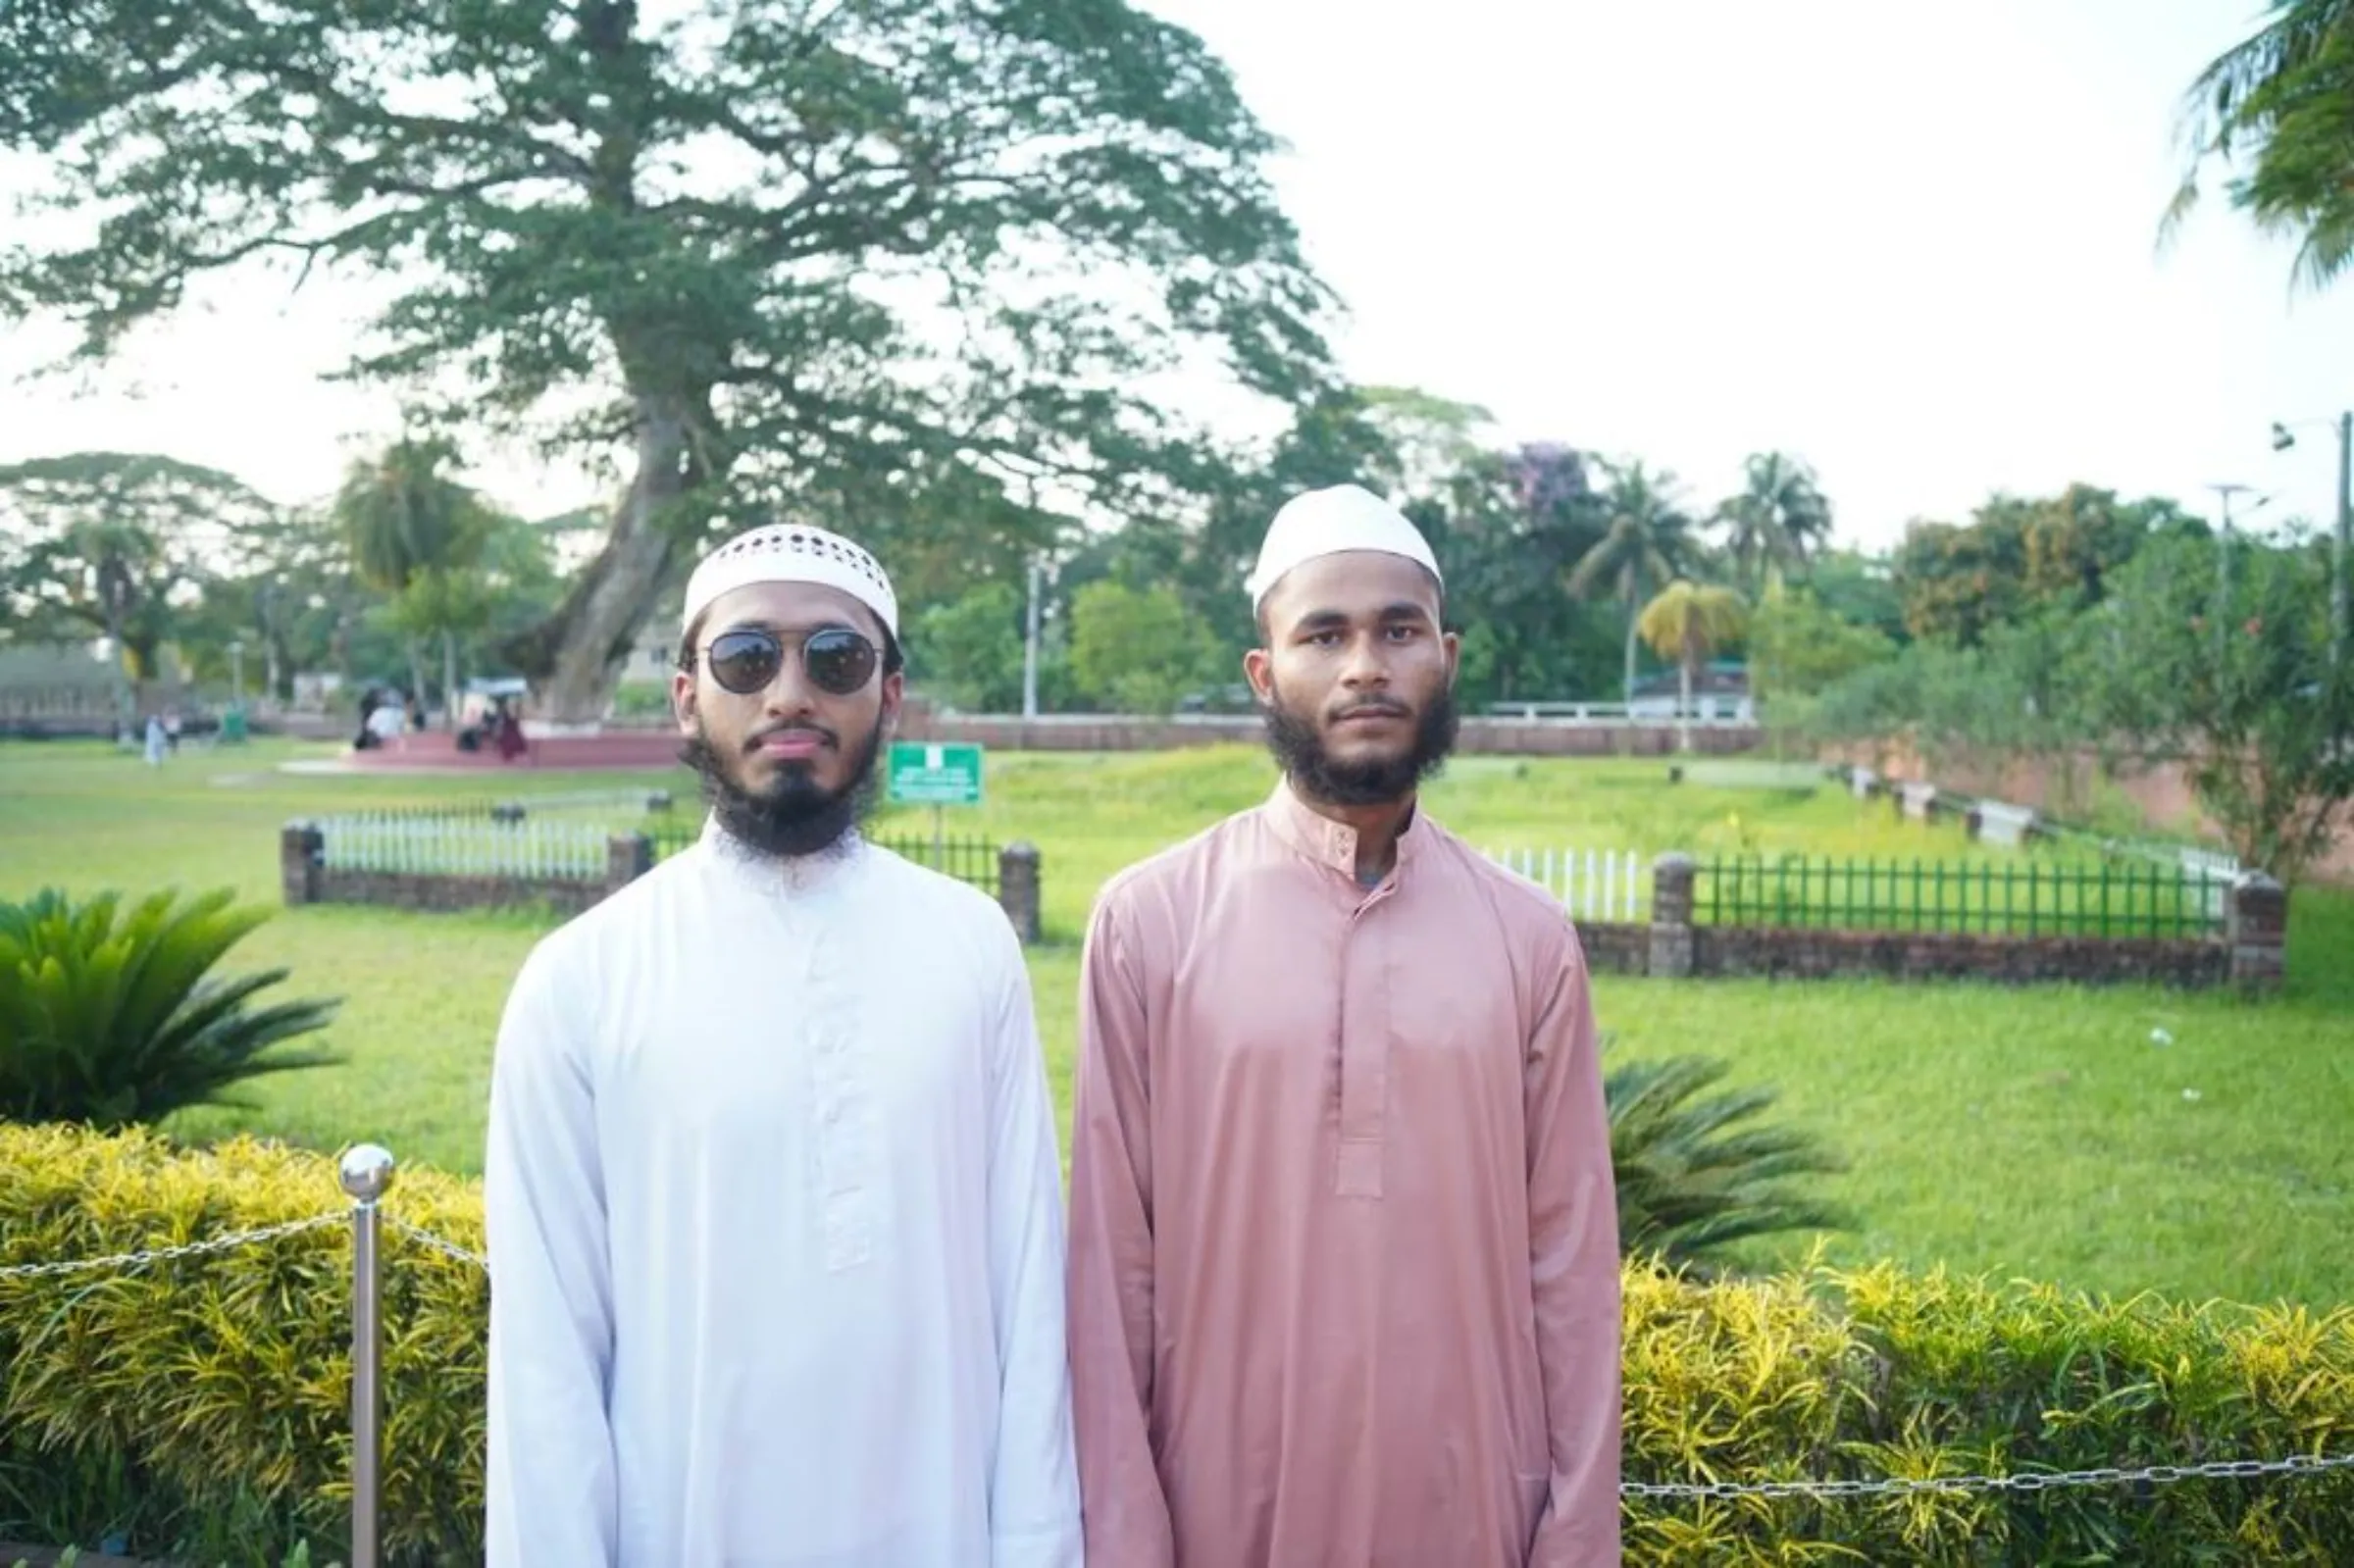 Friends Asad Hossain and Monir Hossain visit the Sixty Dome Mosque Site in Bagherhat, in southern Bangladesh, May 4, 2022